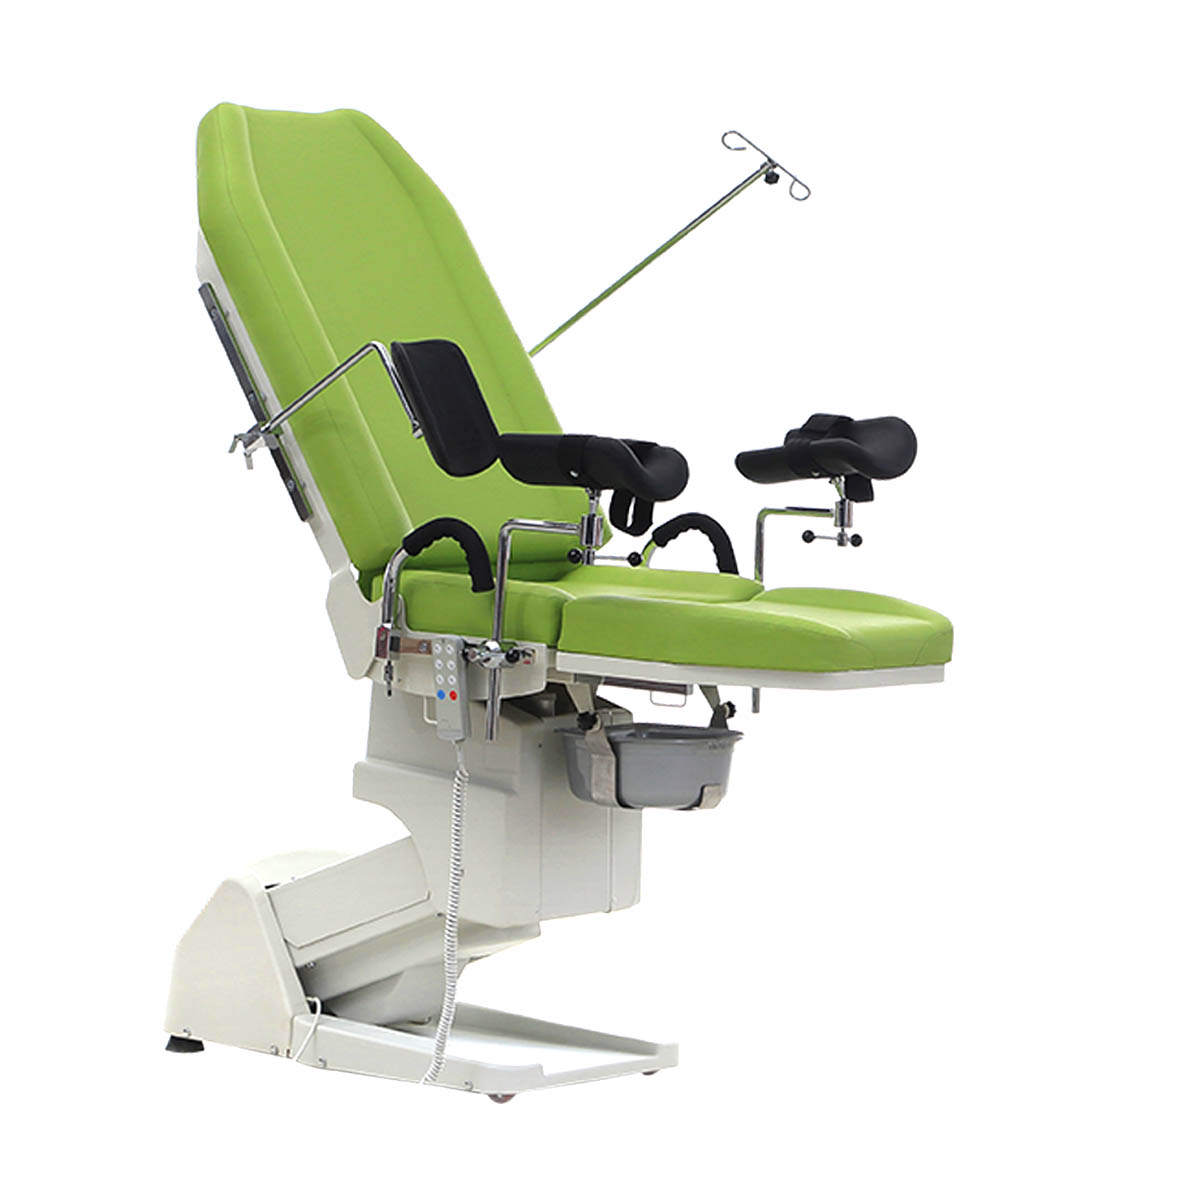 Linealife JME-30 Gynecological Examination Chair with 3 Motors